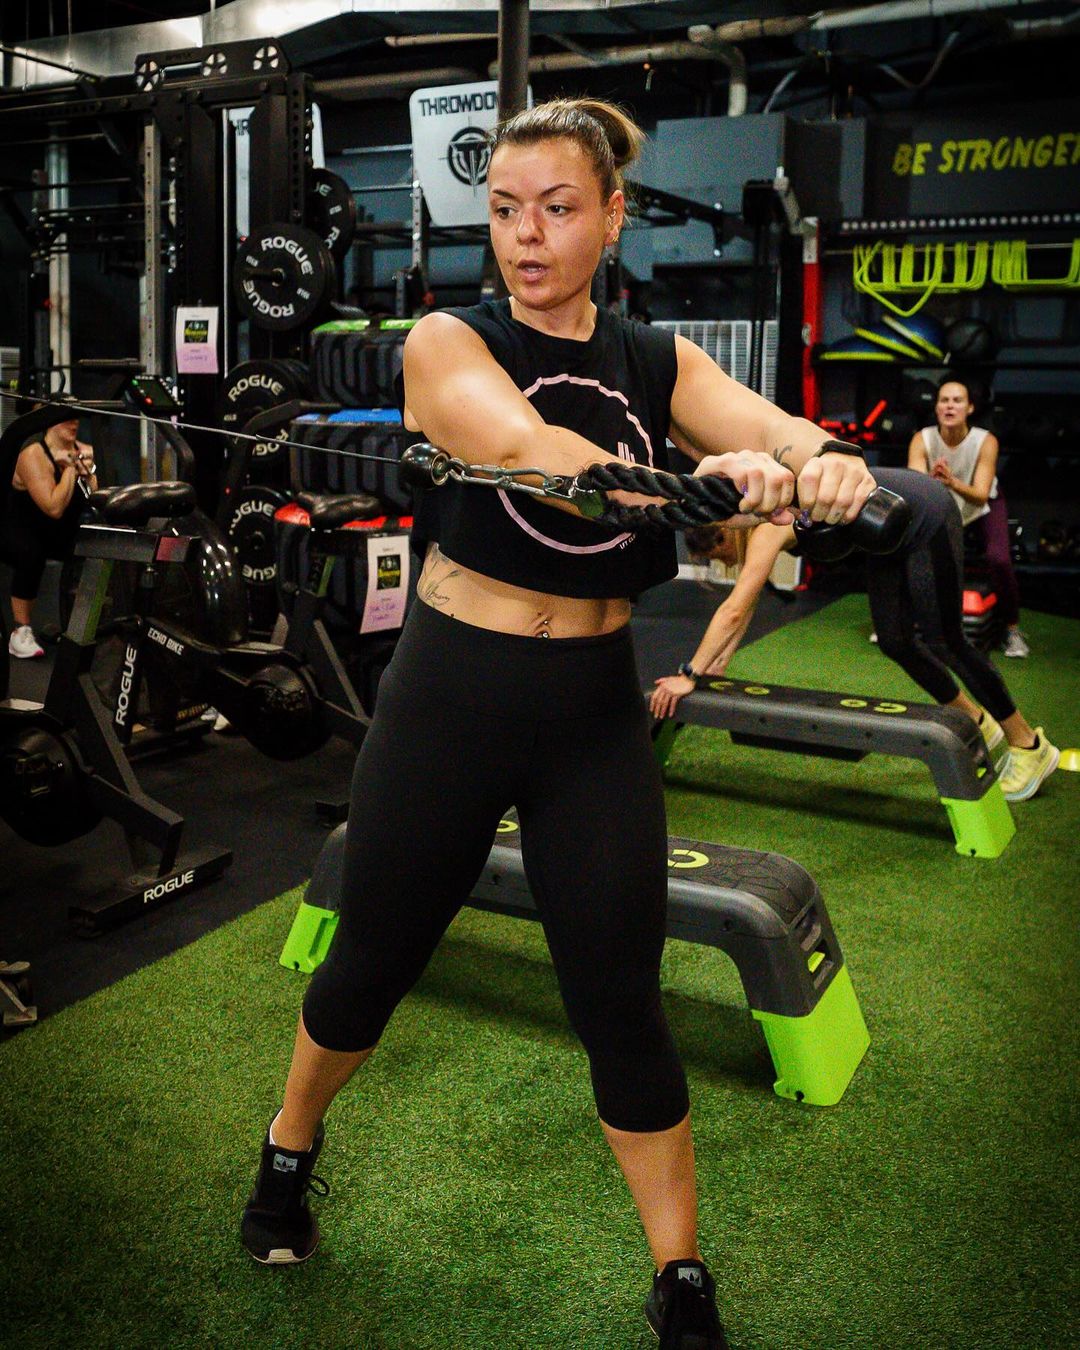 Revolution Fitness Gym - East Northport, NY Health & Fitness Club